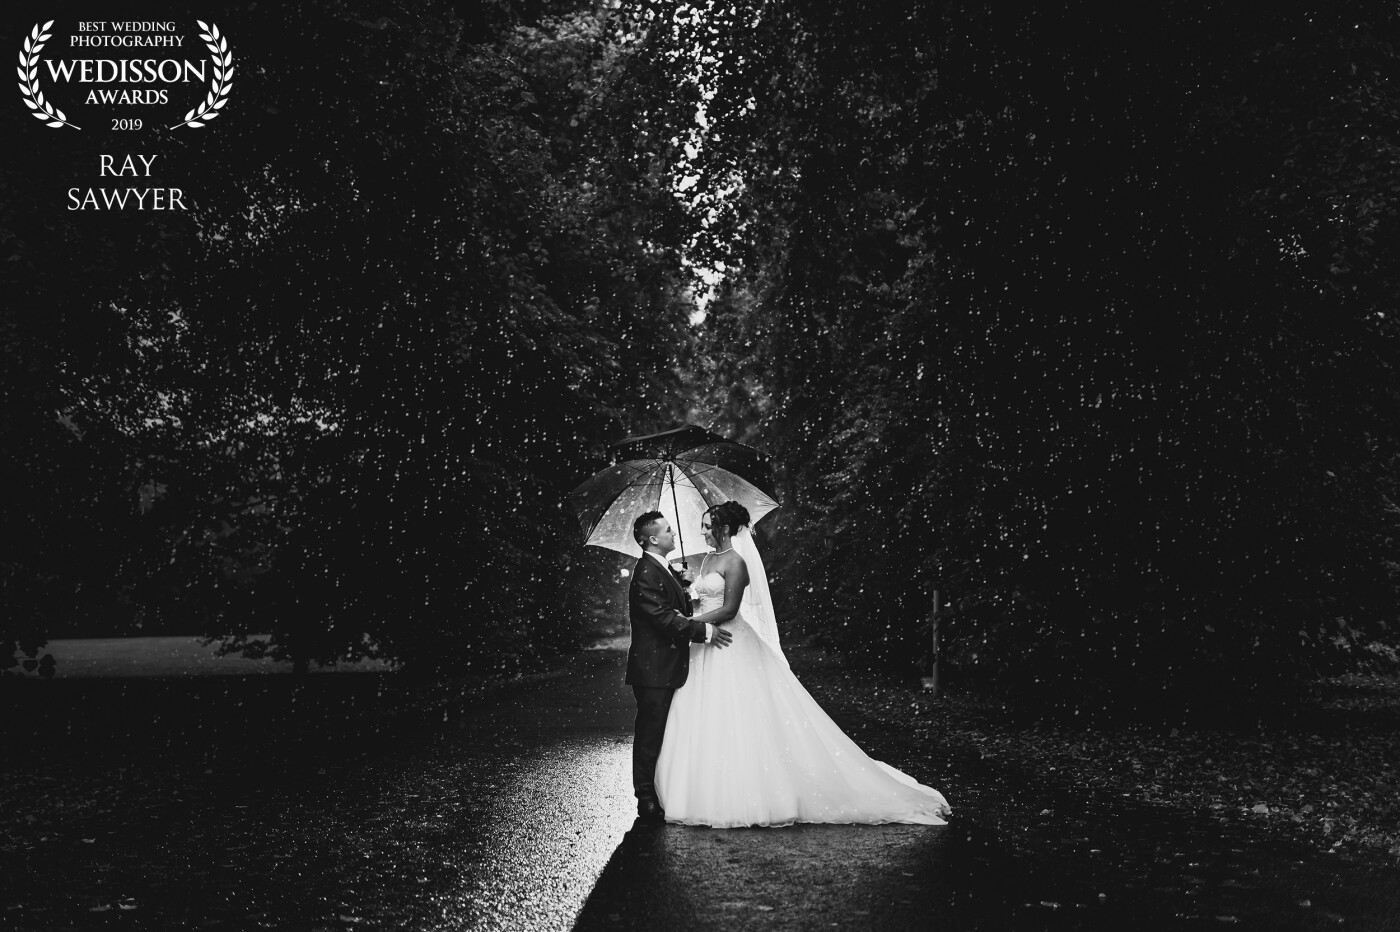 Another rainy day wedding. I took the couple outside just before sunset and completed their couple portraits. For this shot, I placed y AD200 flash about 5-7m behind them with a Grid and Sphere. Backlighting the couple but also backlights the rain and freezes it.